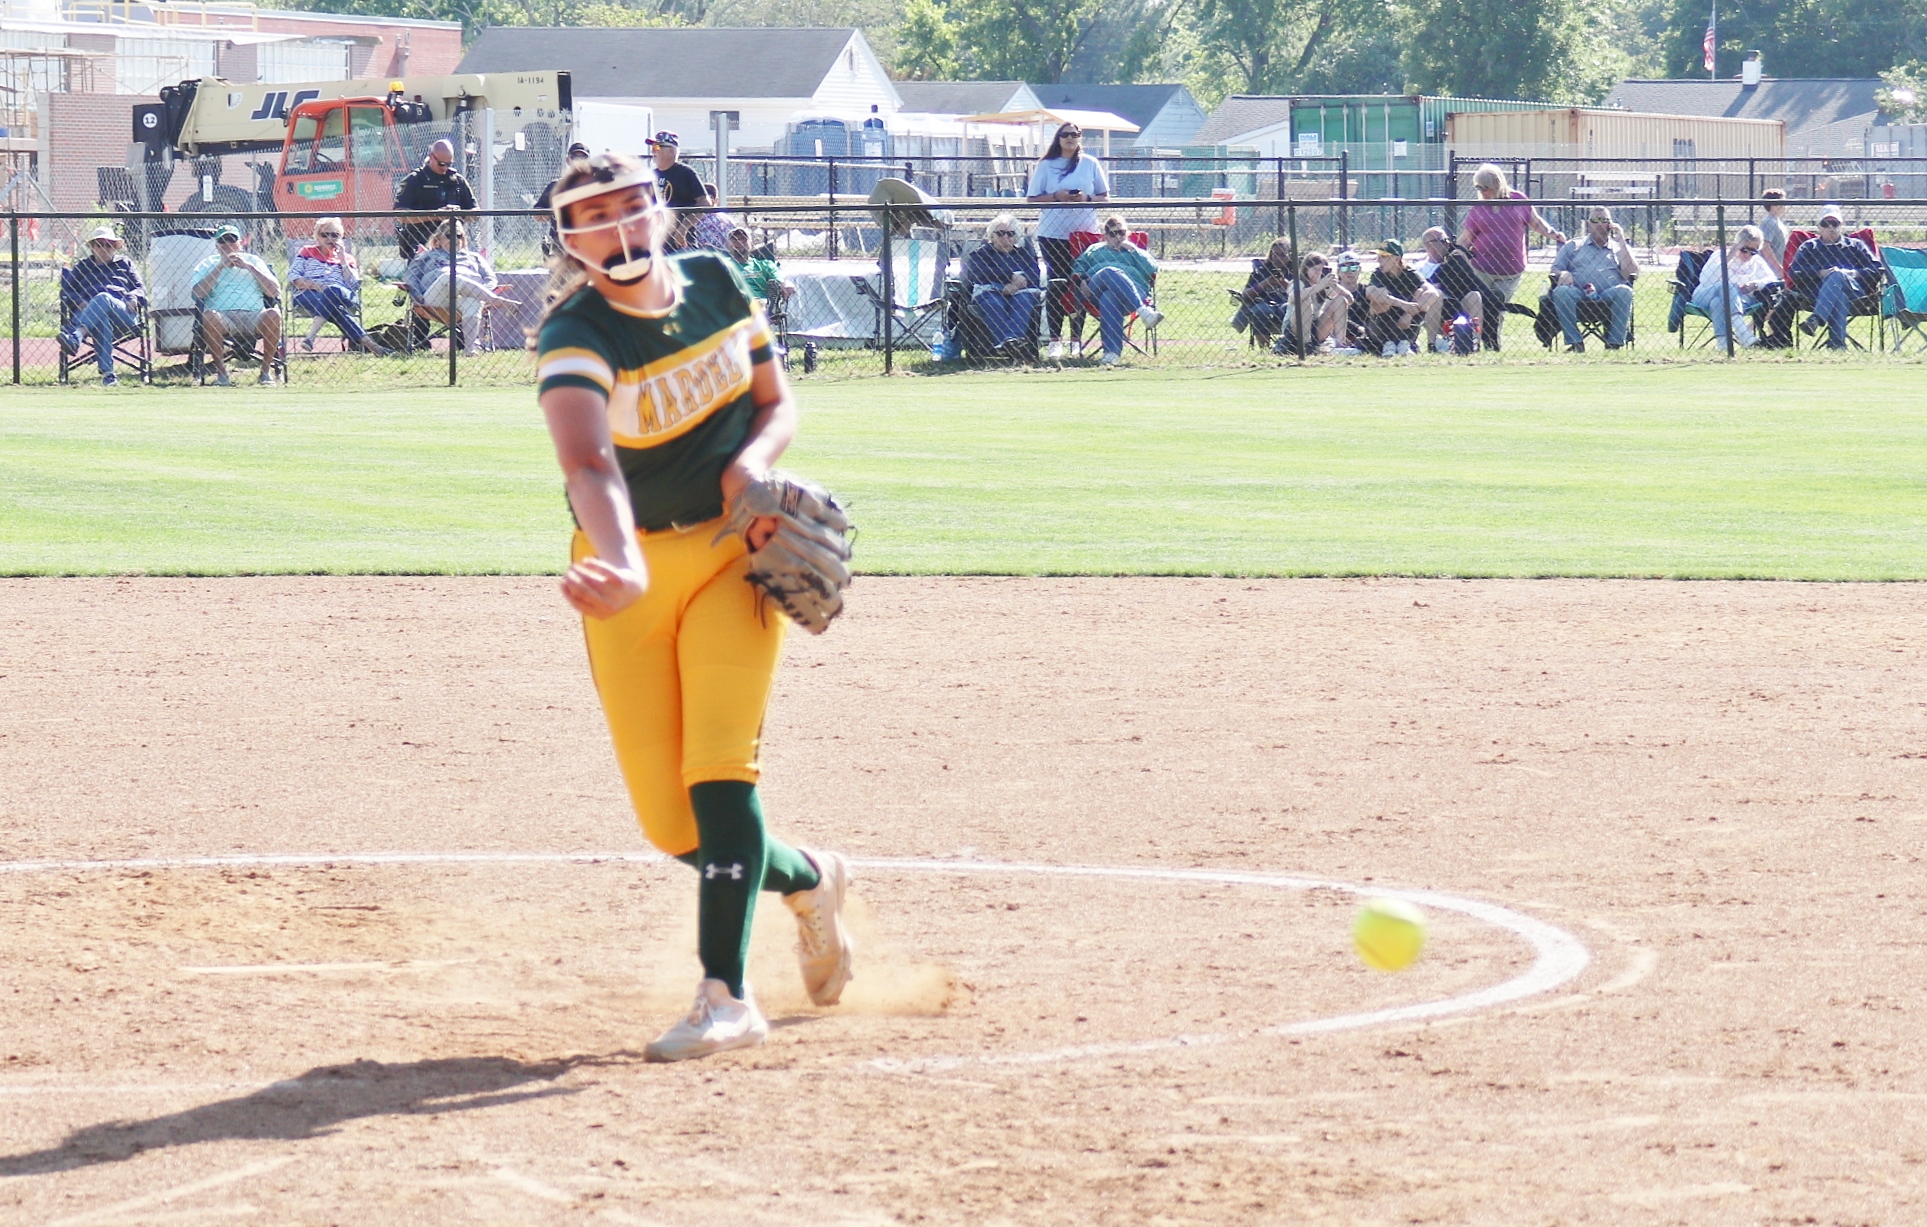 Mardela player throws pitch during softball game